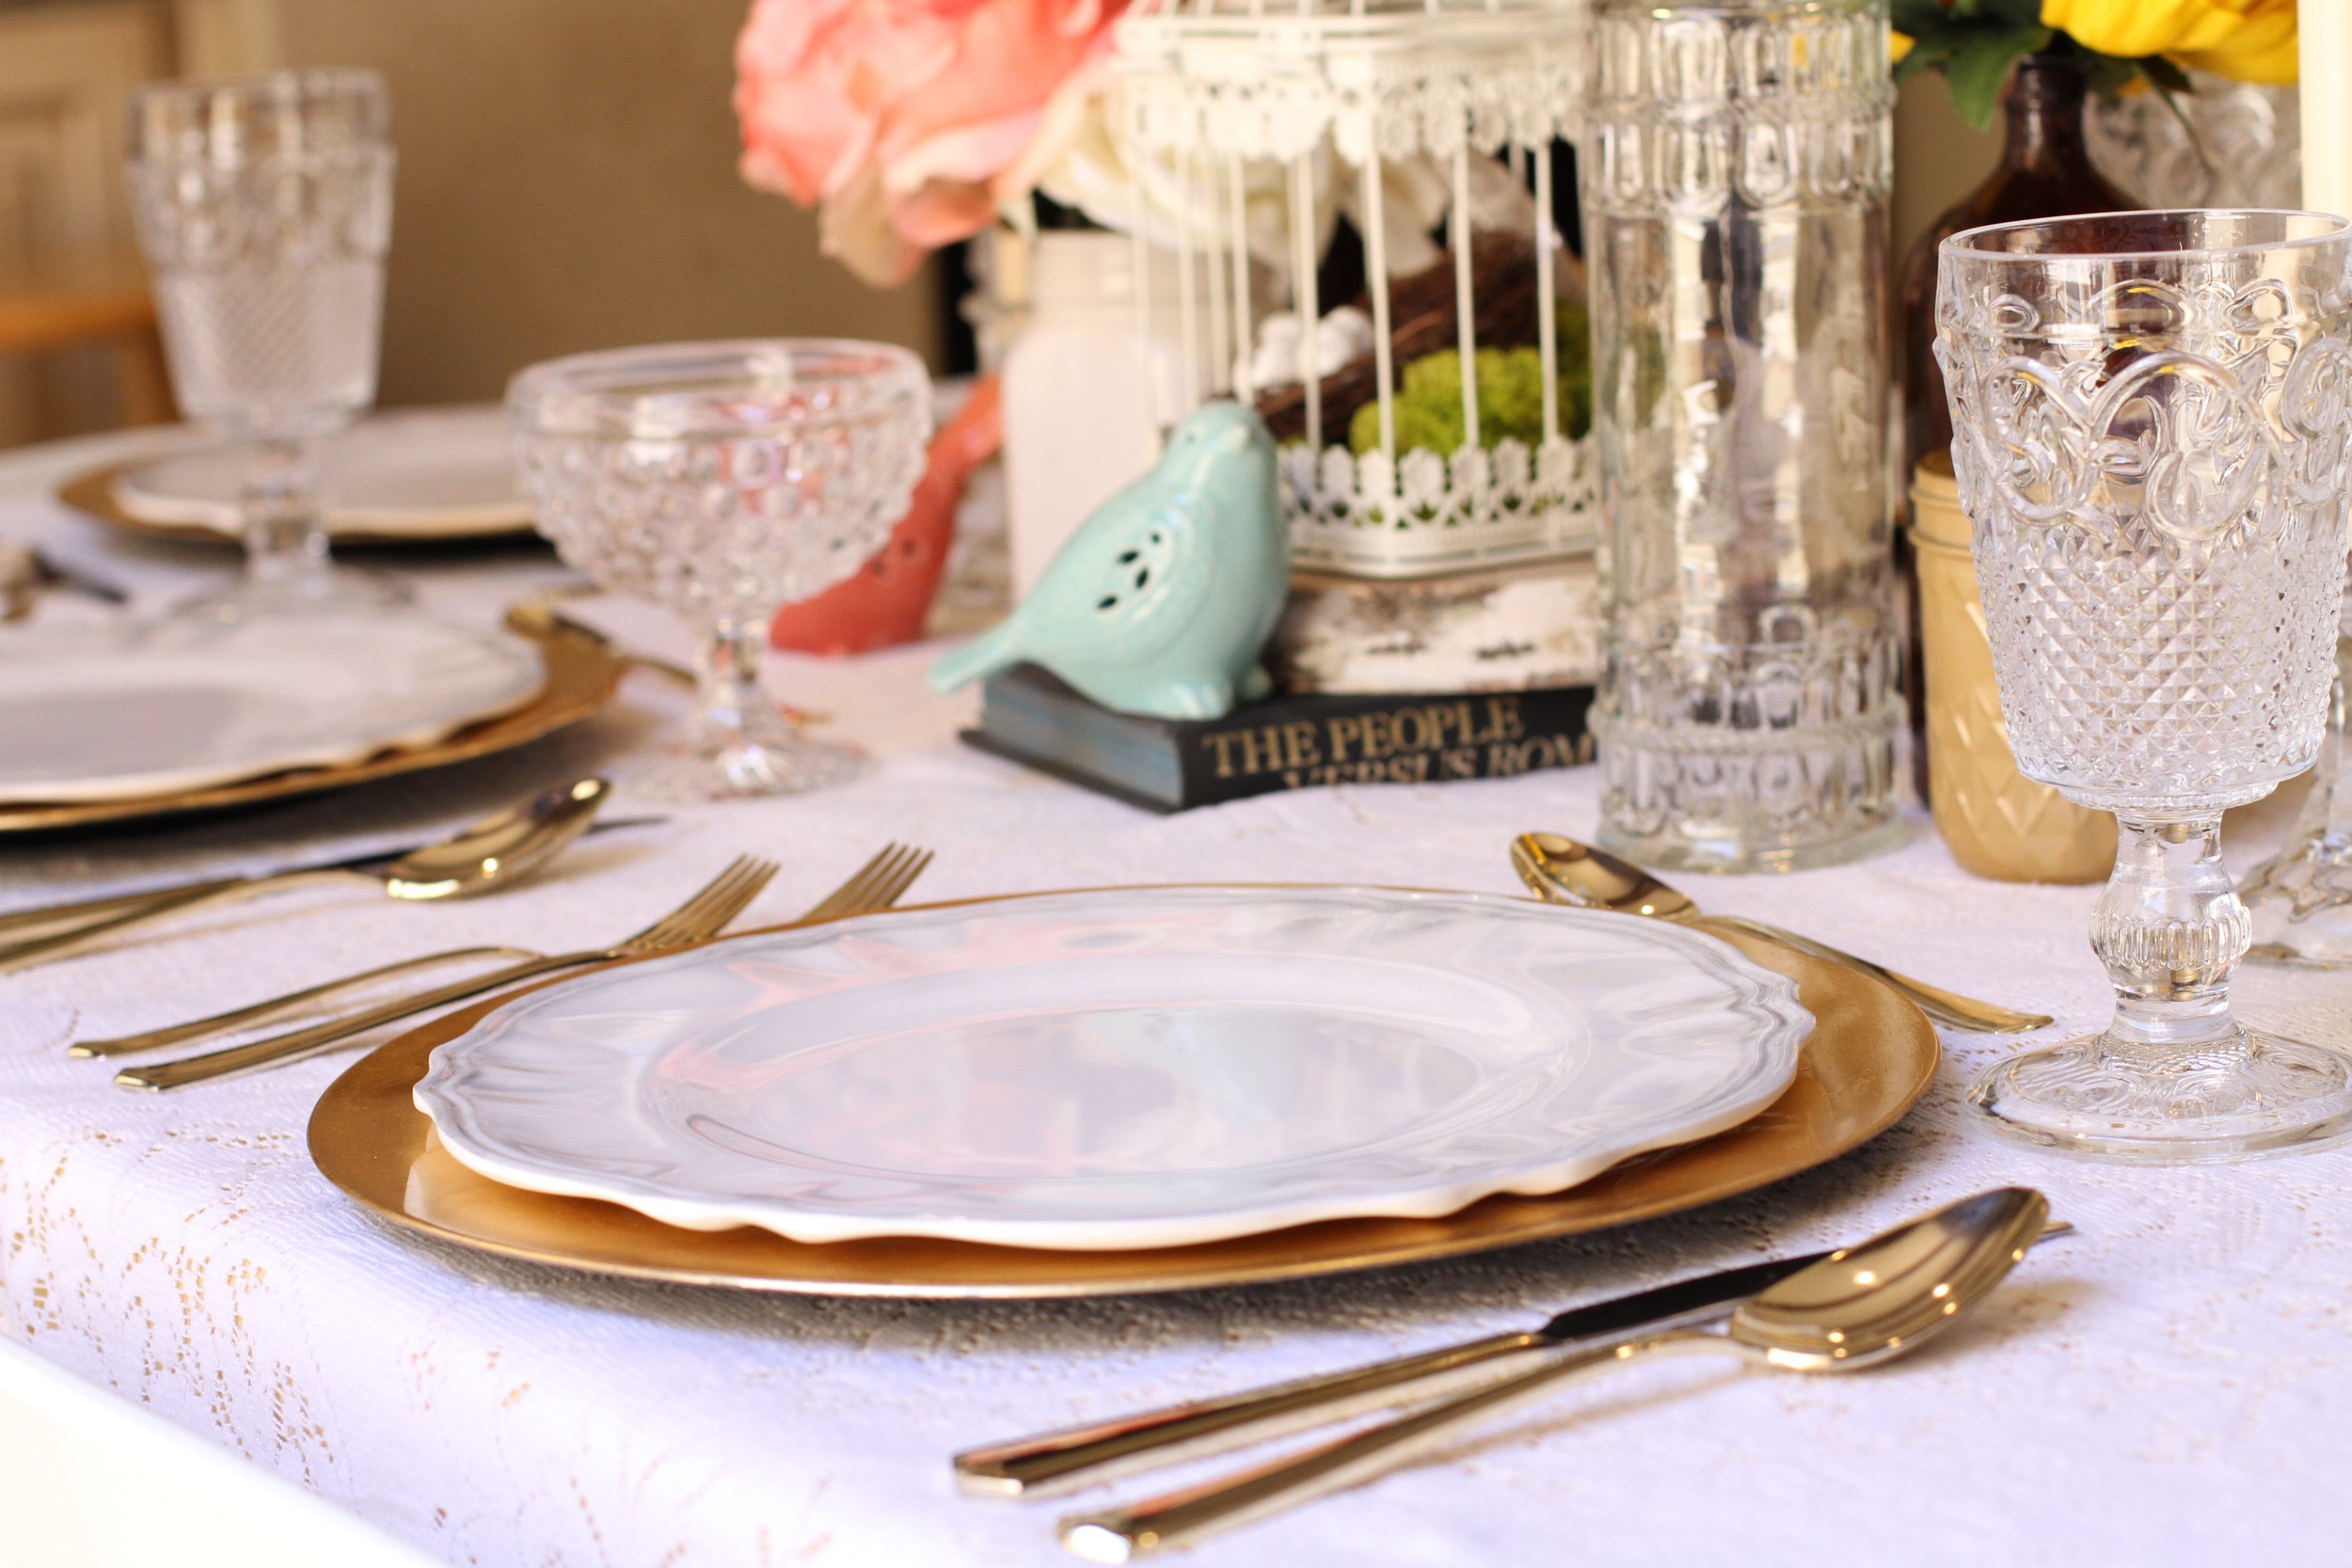 Copy of A dream-come-true vintage birdie themed baby shower! - Prepackaged and Ready to Rent from @inJOYtheParty!